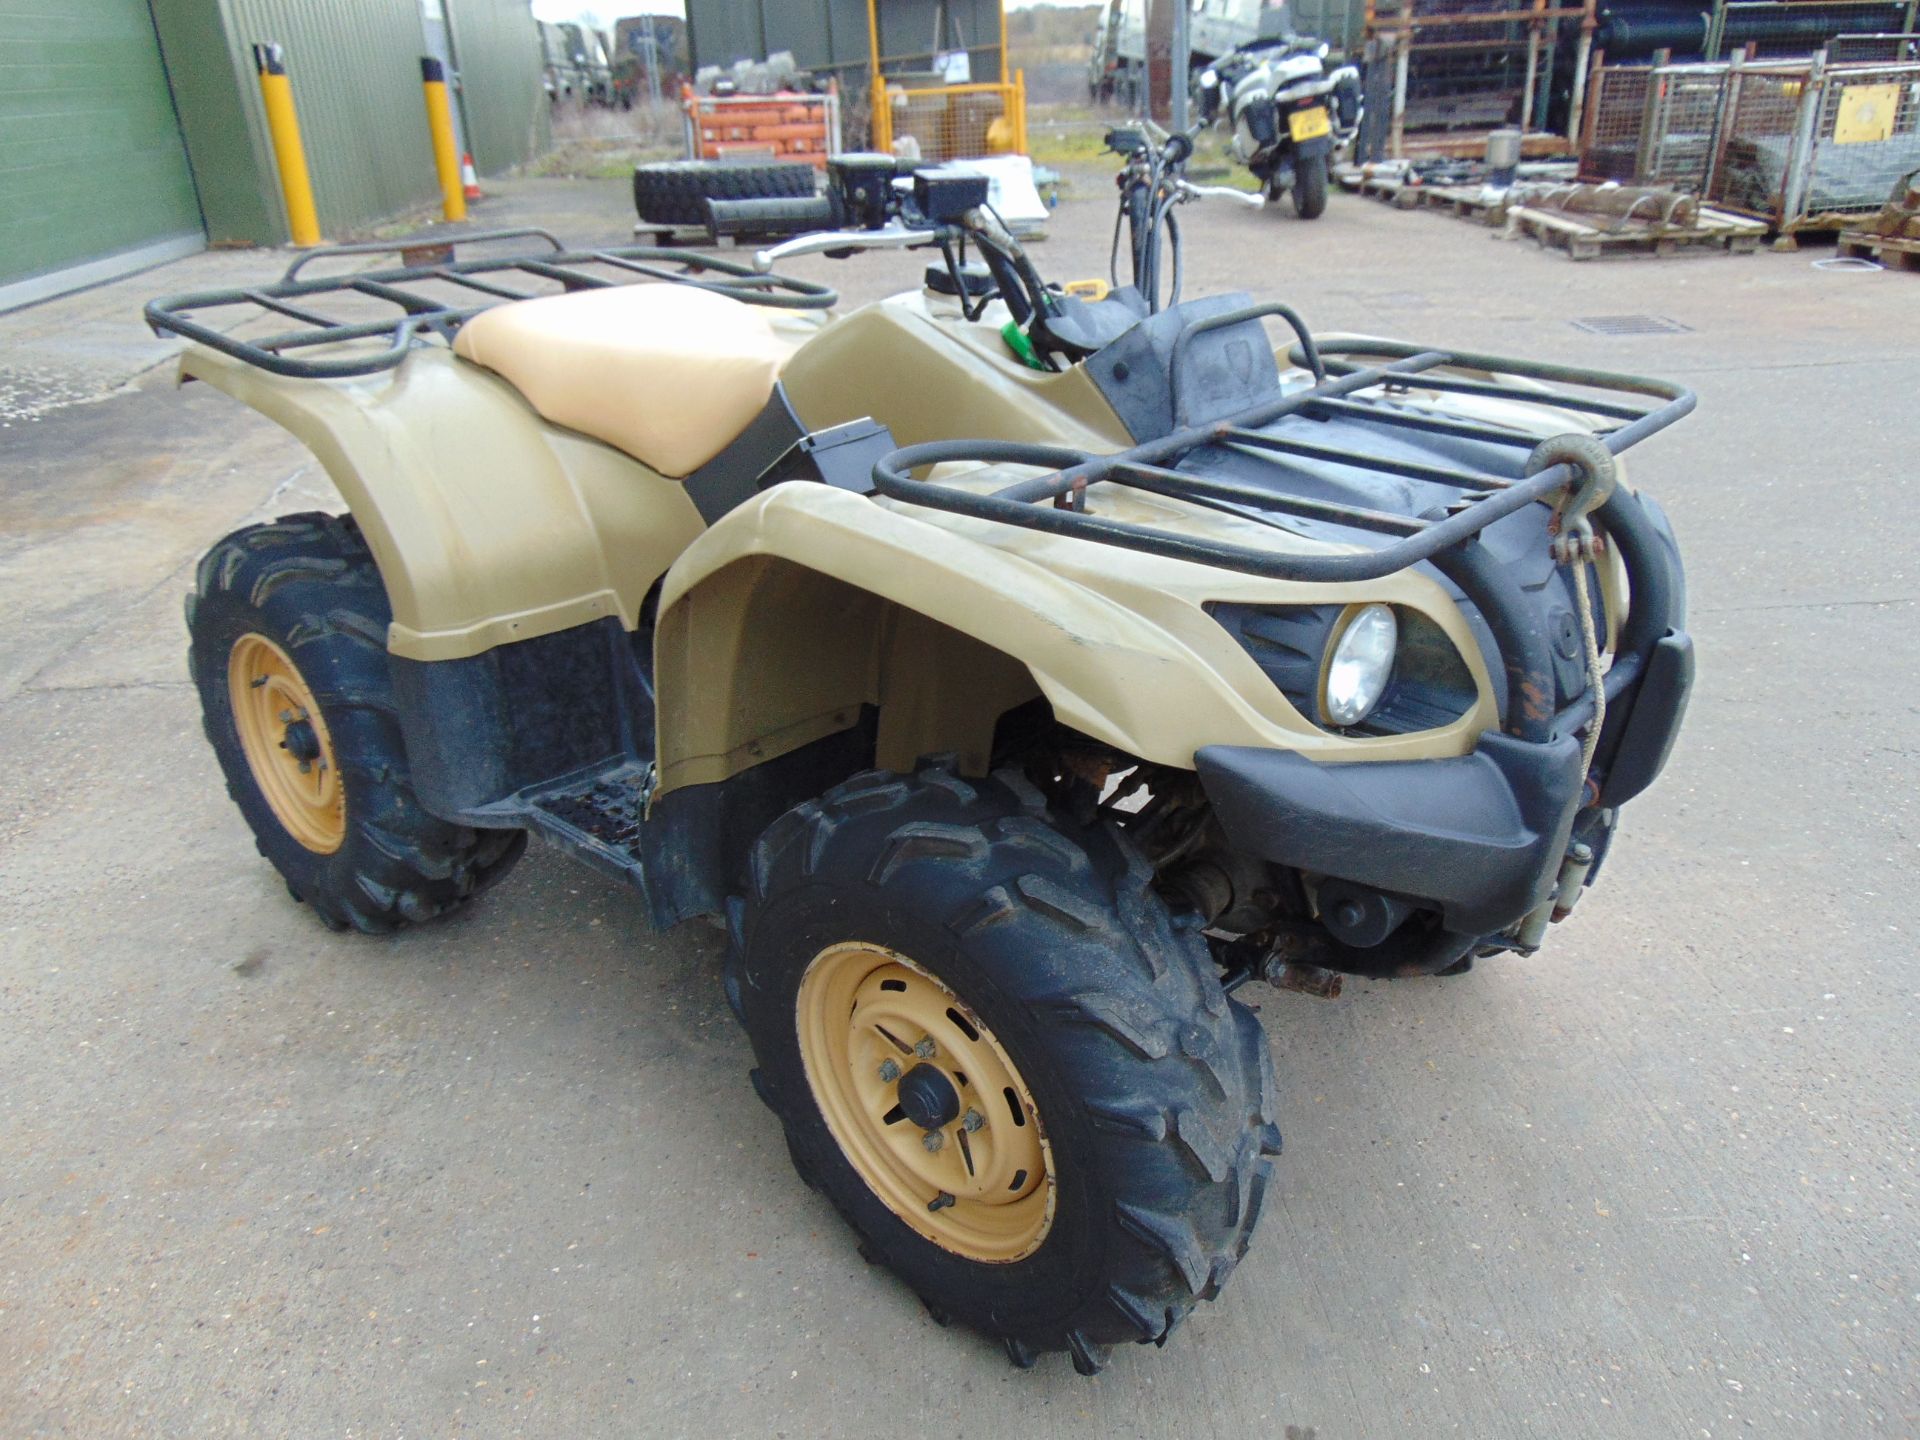 Recent Release Military Specification Yamaha Grizzly 450 4 x 4 ATV Quad Bike ONLY 59 HOURS!!! - Image 4 of 20